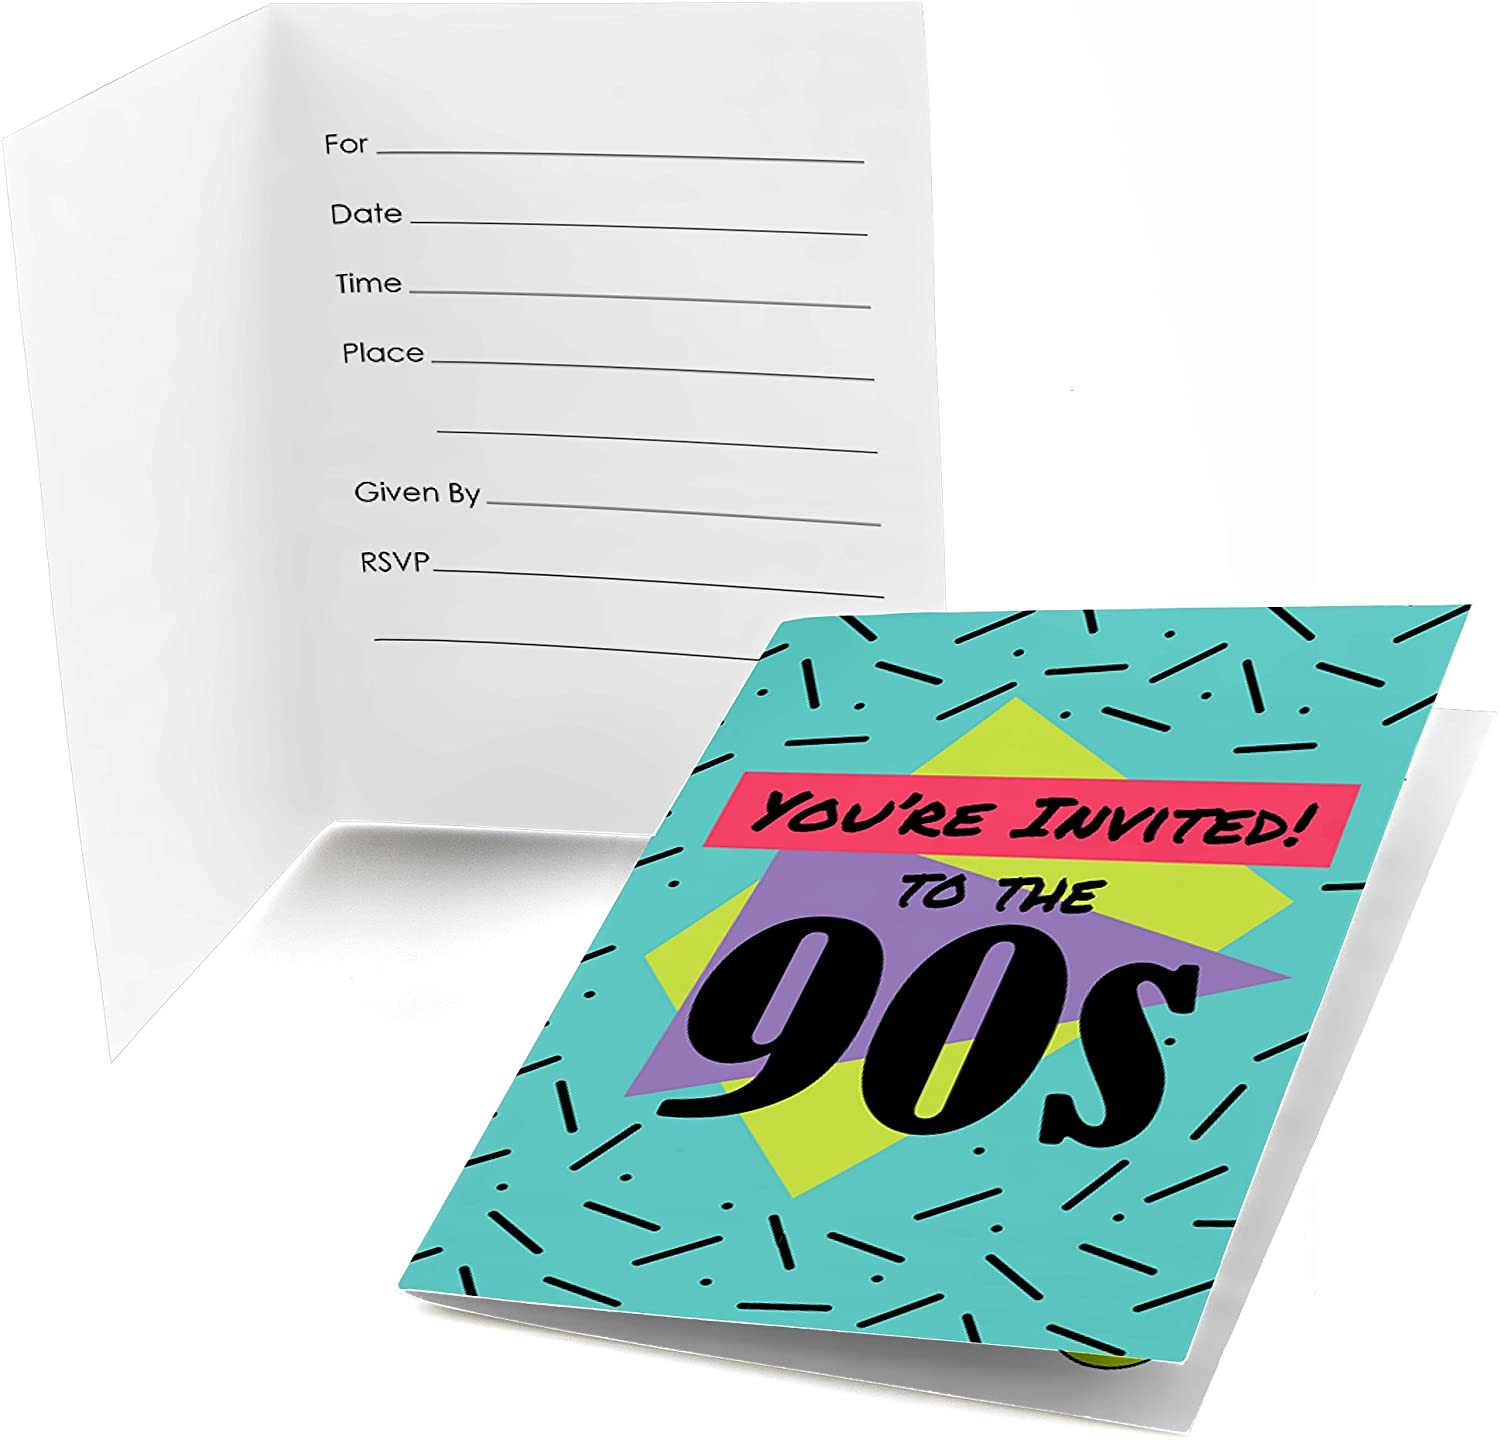 What-You-Need-to-Throw-a-90s-Themed-Party